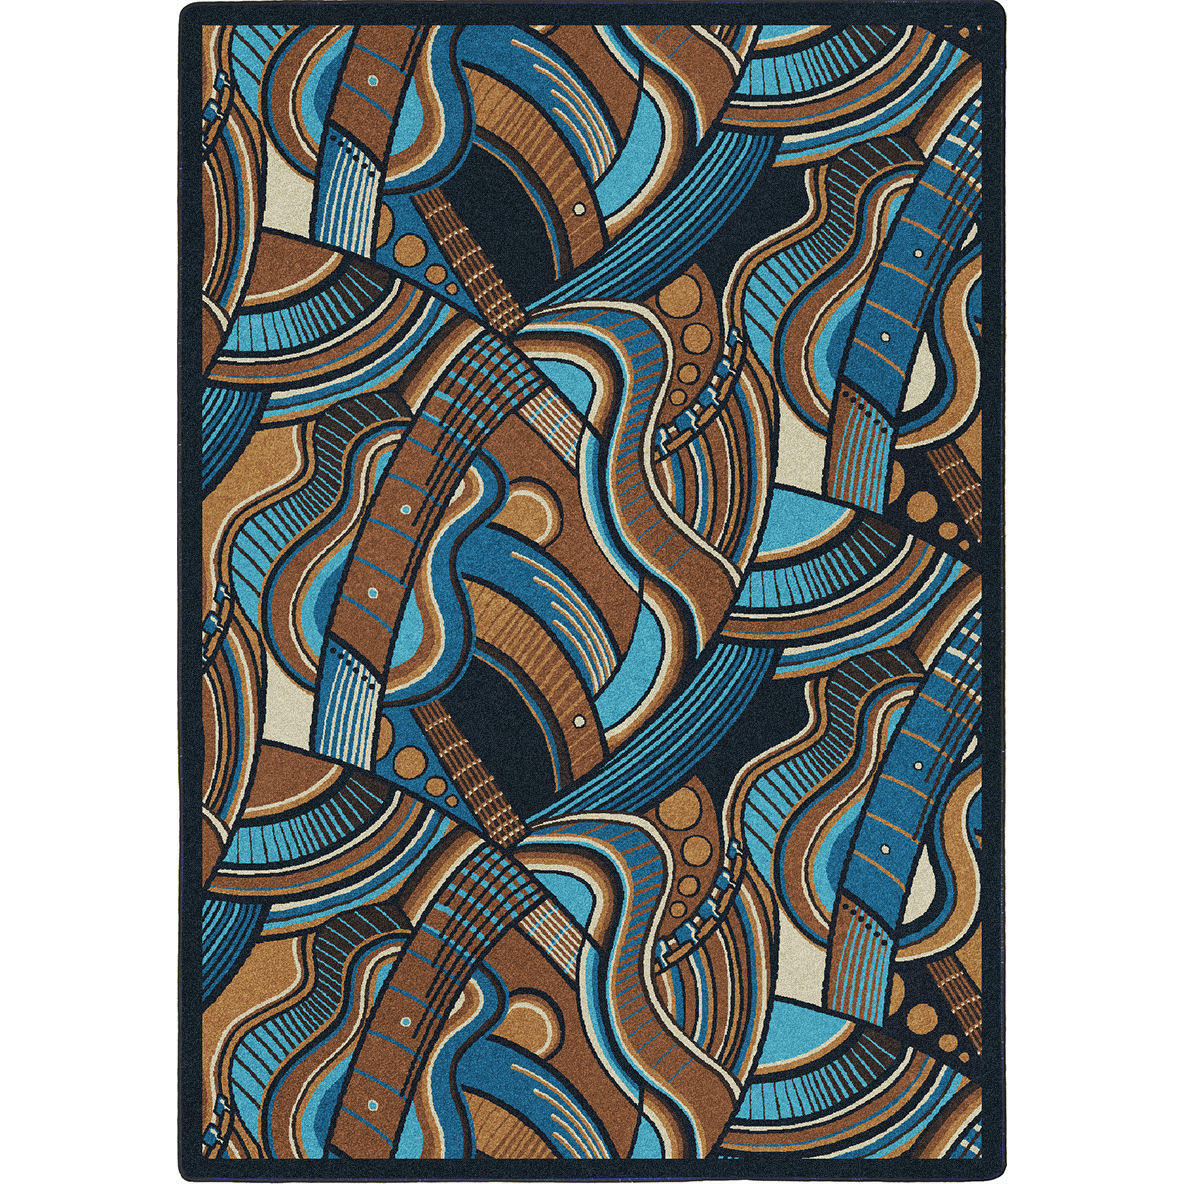 Dark Army Joy Carpets Kaleidoscope Funky Camo Whimsical Area Rugs 46-Inch by 64-Inch by 0.36-Inch 